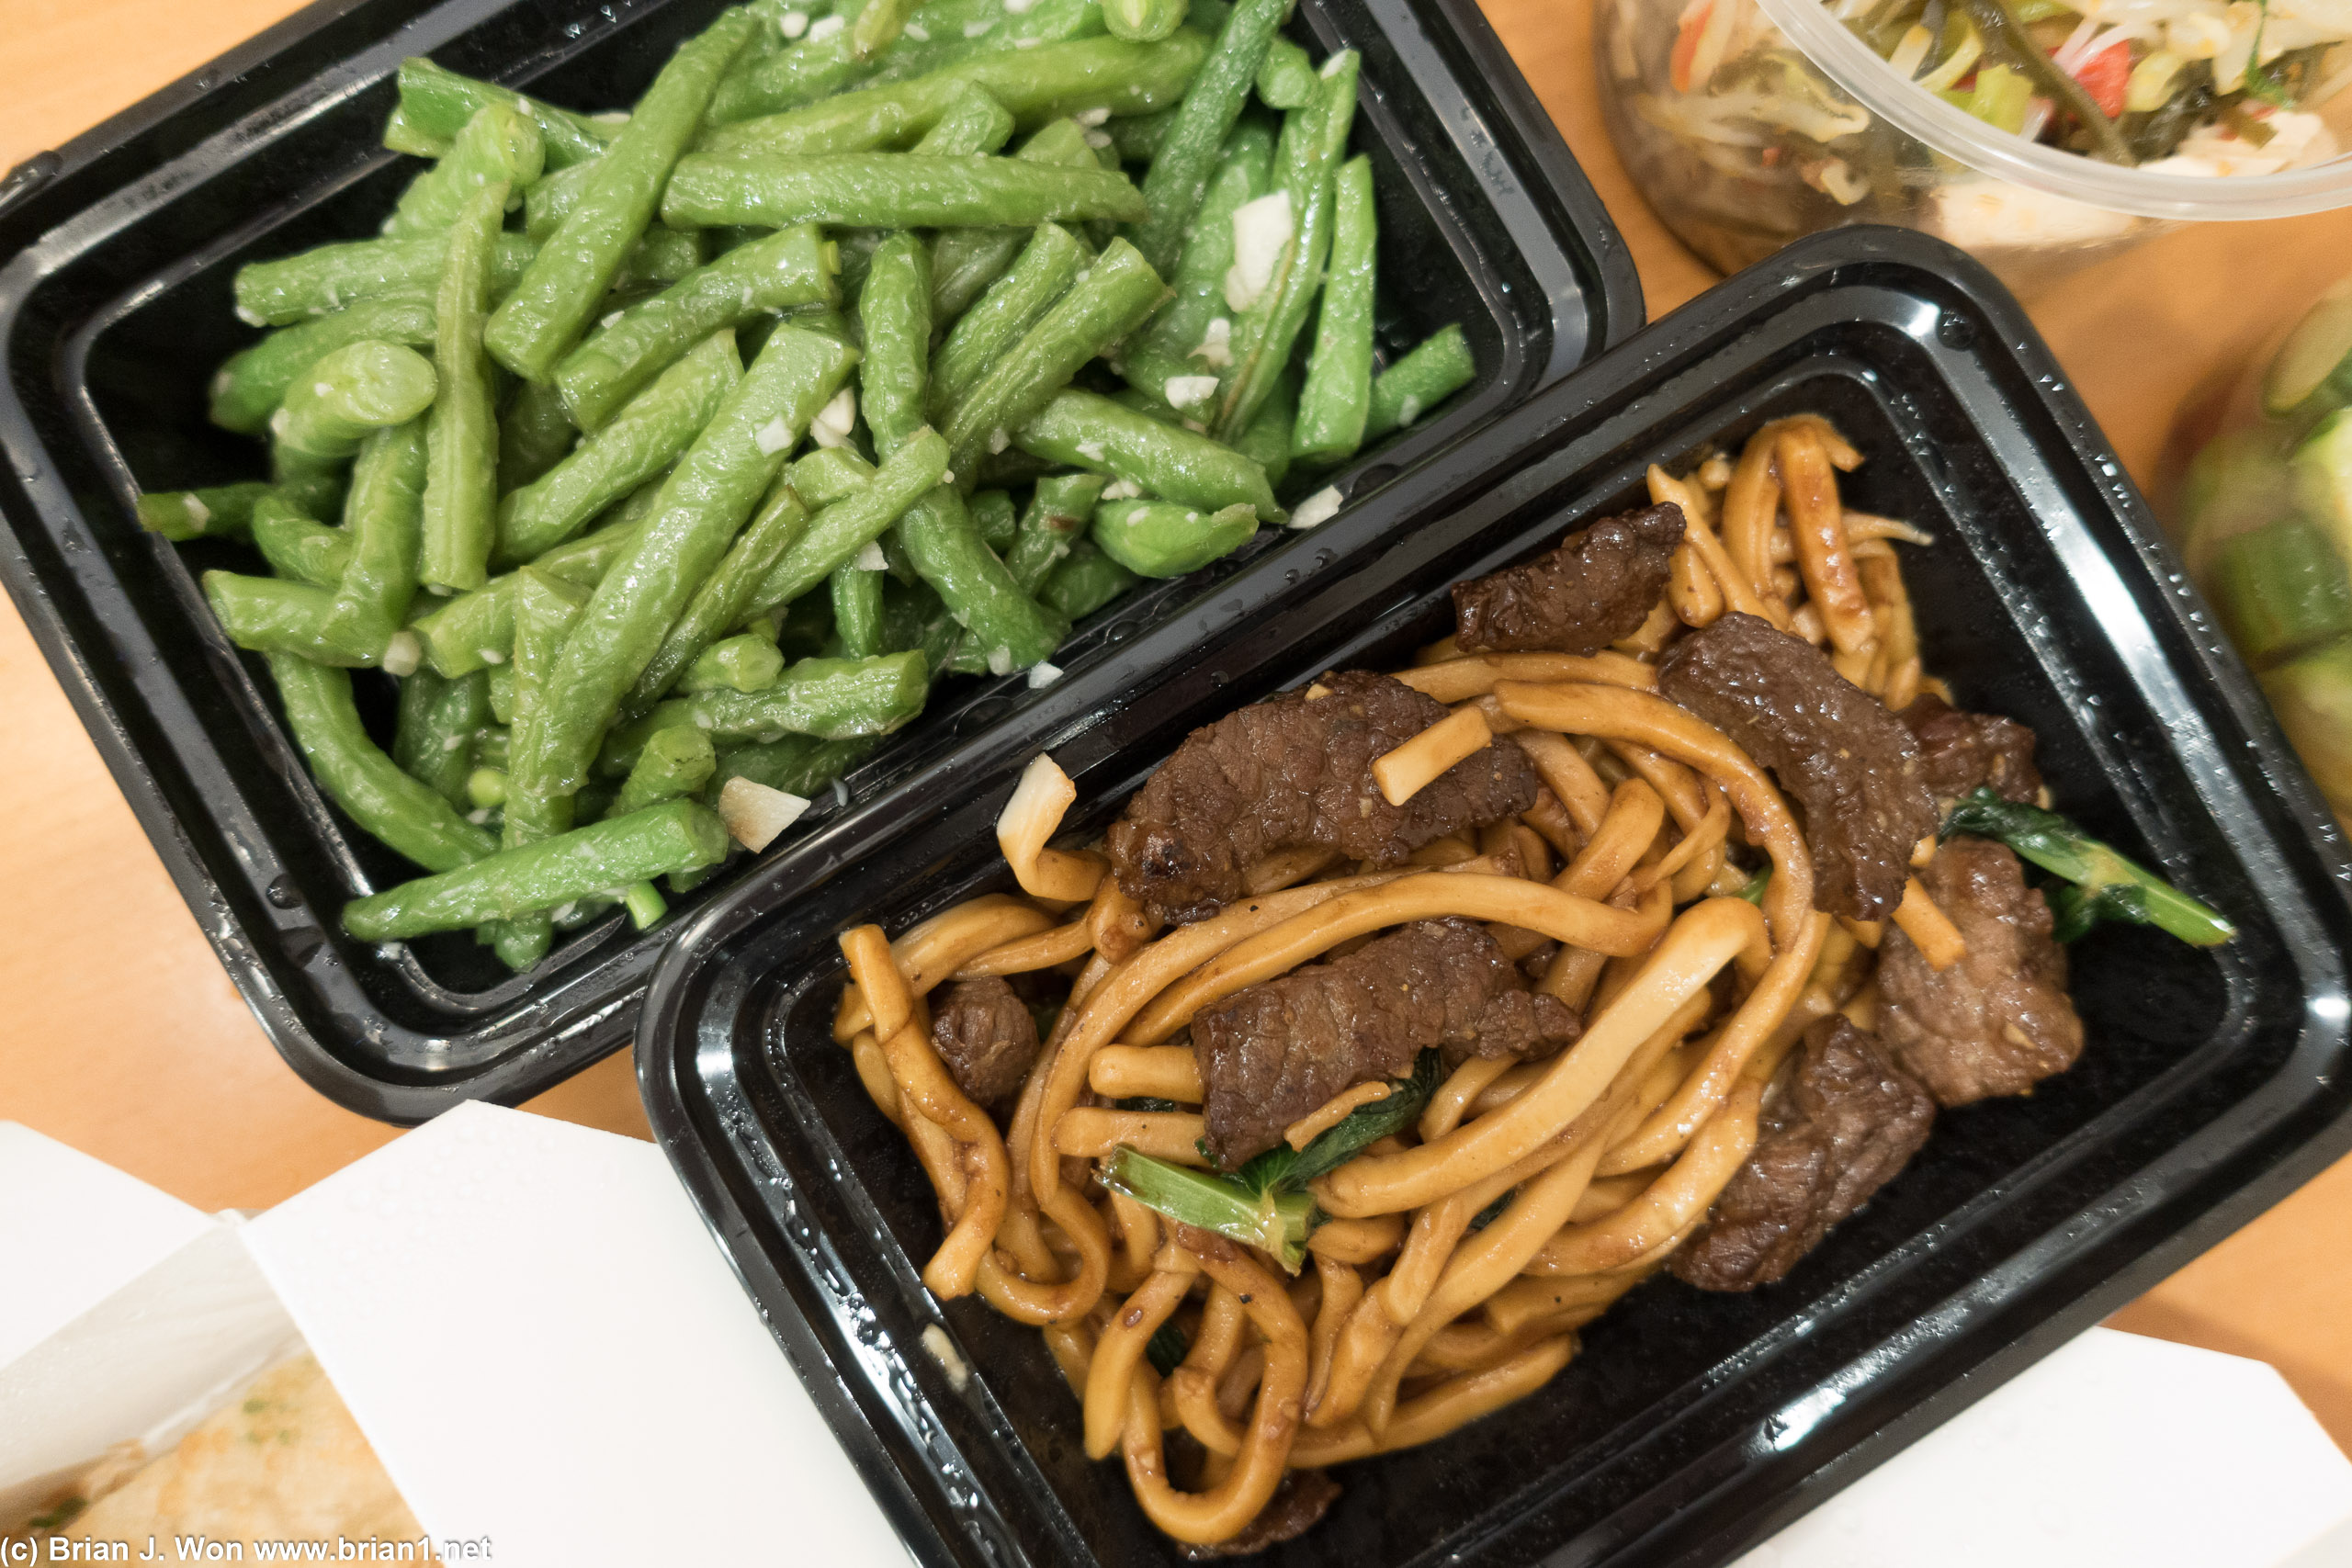 Green beans were okay, shortrib noodle was quite good-- although spicing was mostly soy sauce.